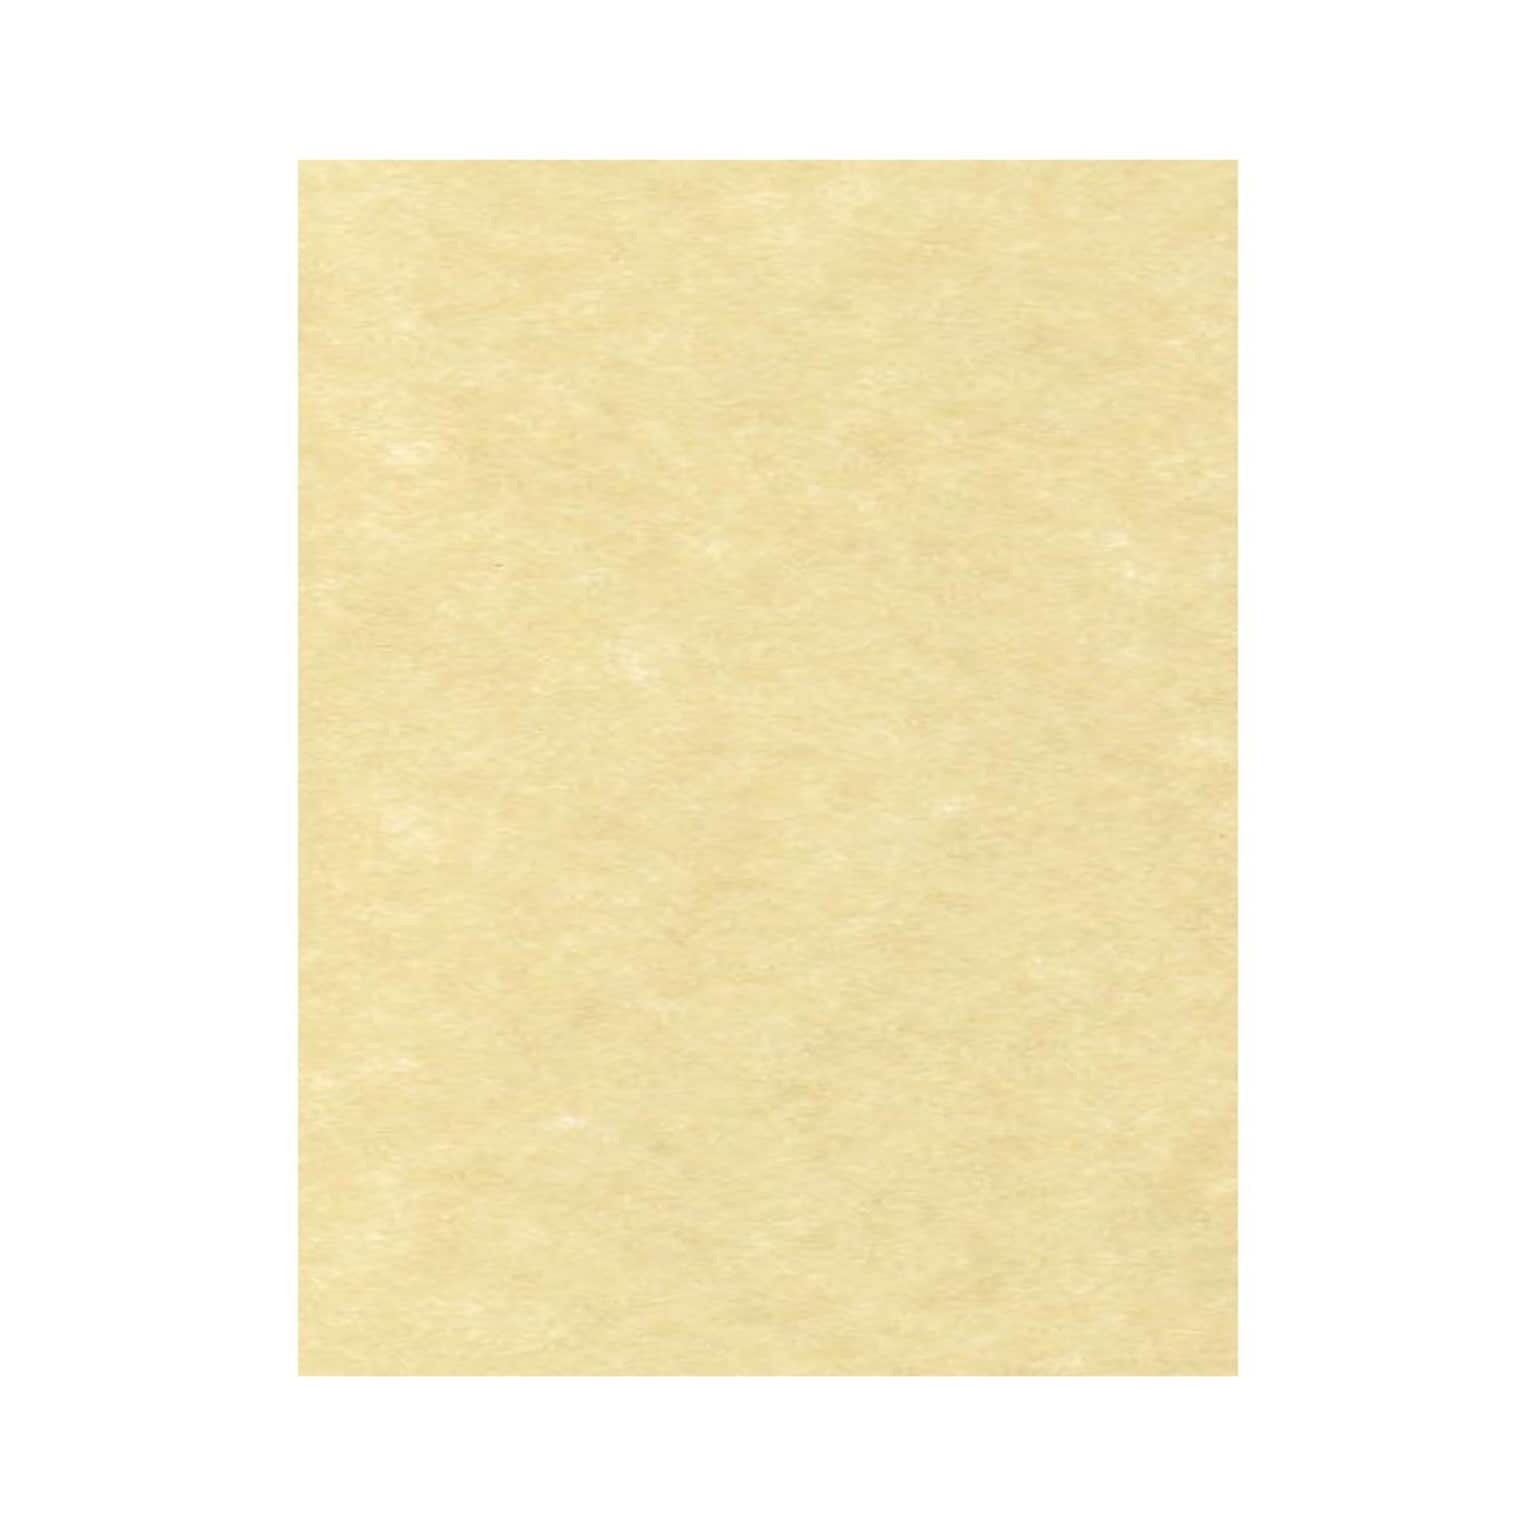 LUX Colored Paper, 28 lbs., 8.5 x 11, Gold Parchment, 50 Sheets/Pack (81211-P-41-50)